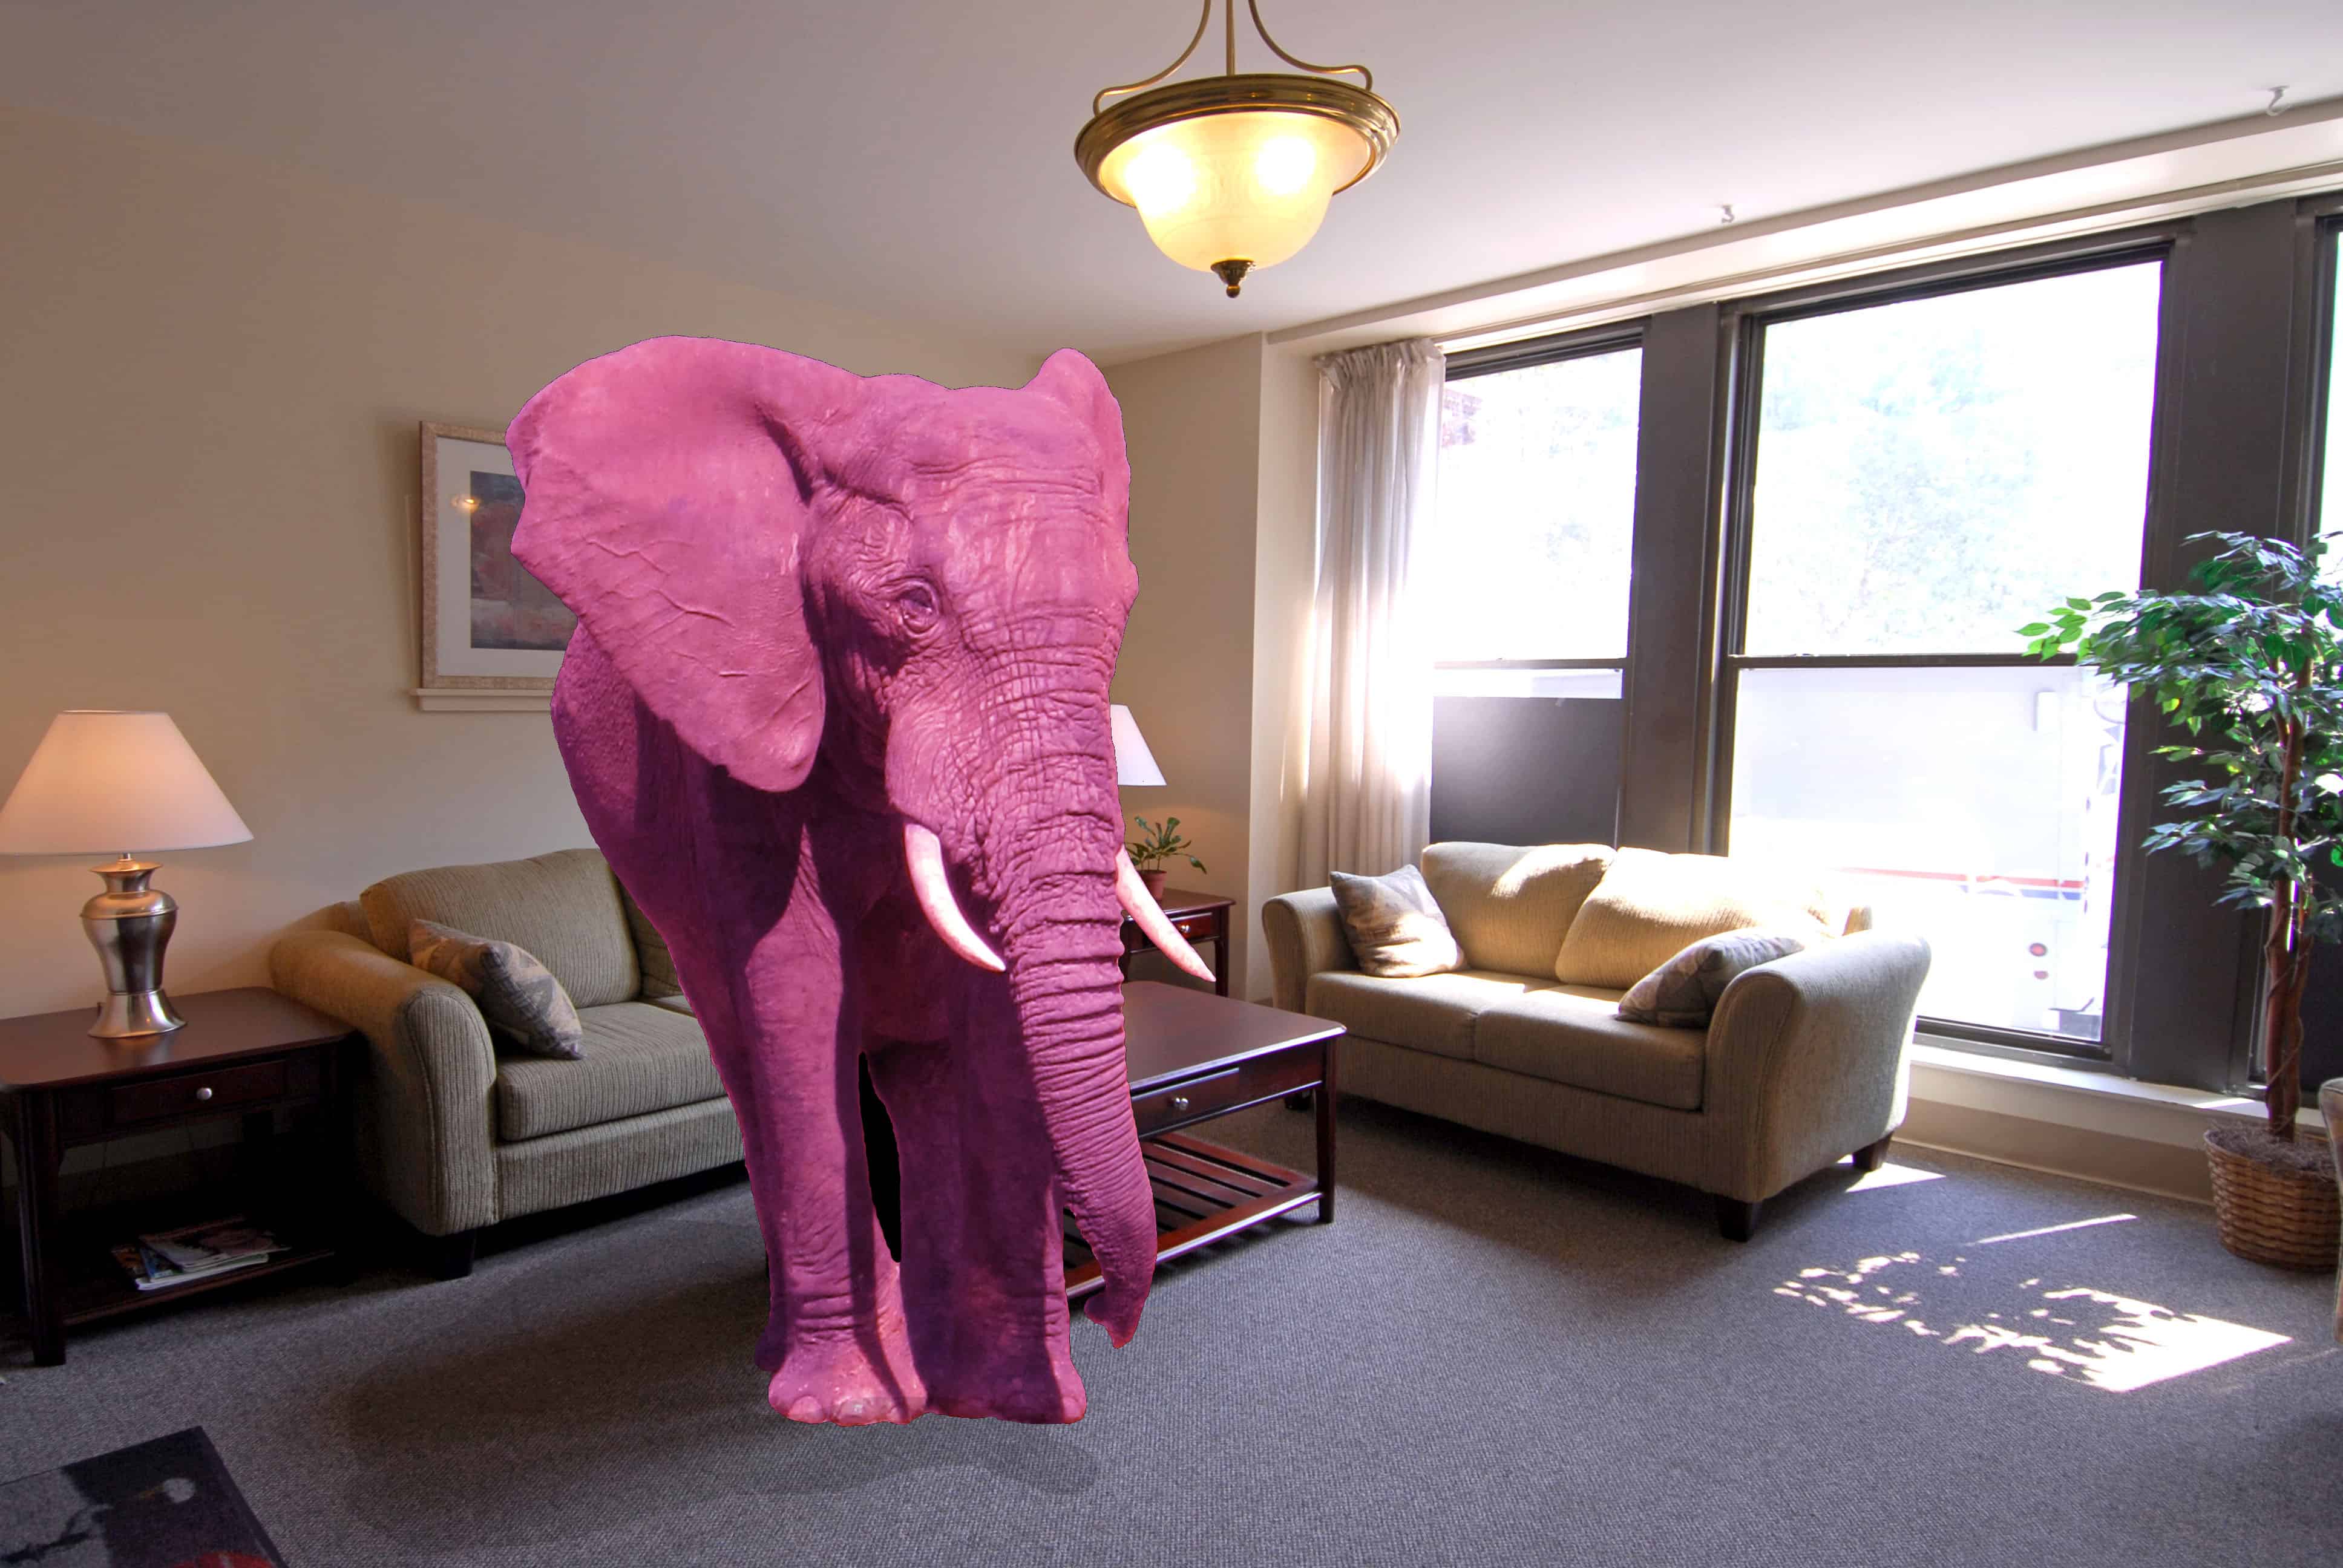 The Elephant In My Living Room